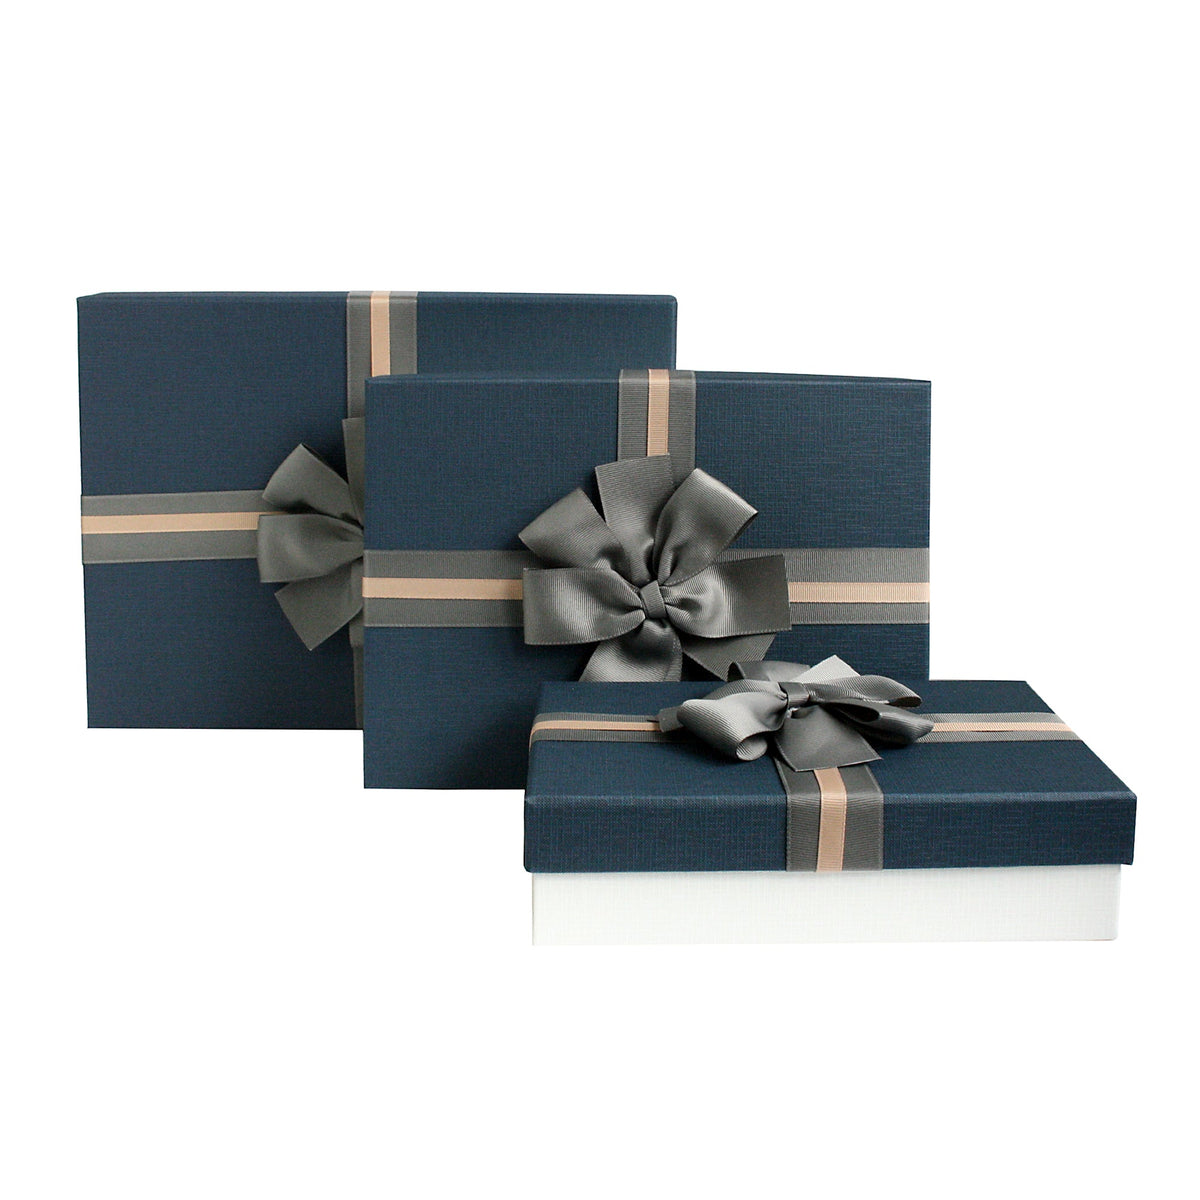 Set of 3 Cream/Blue Gift Boxes With Grey Satin Ribbon